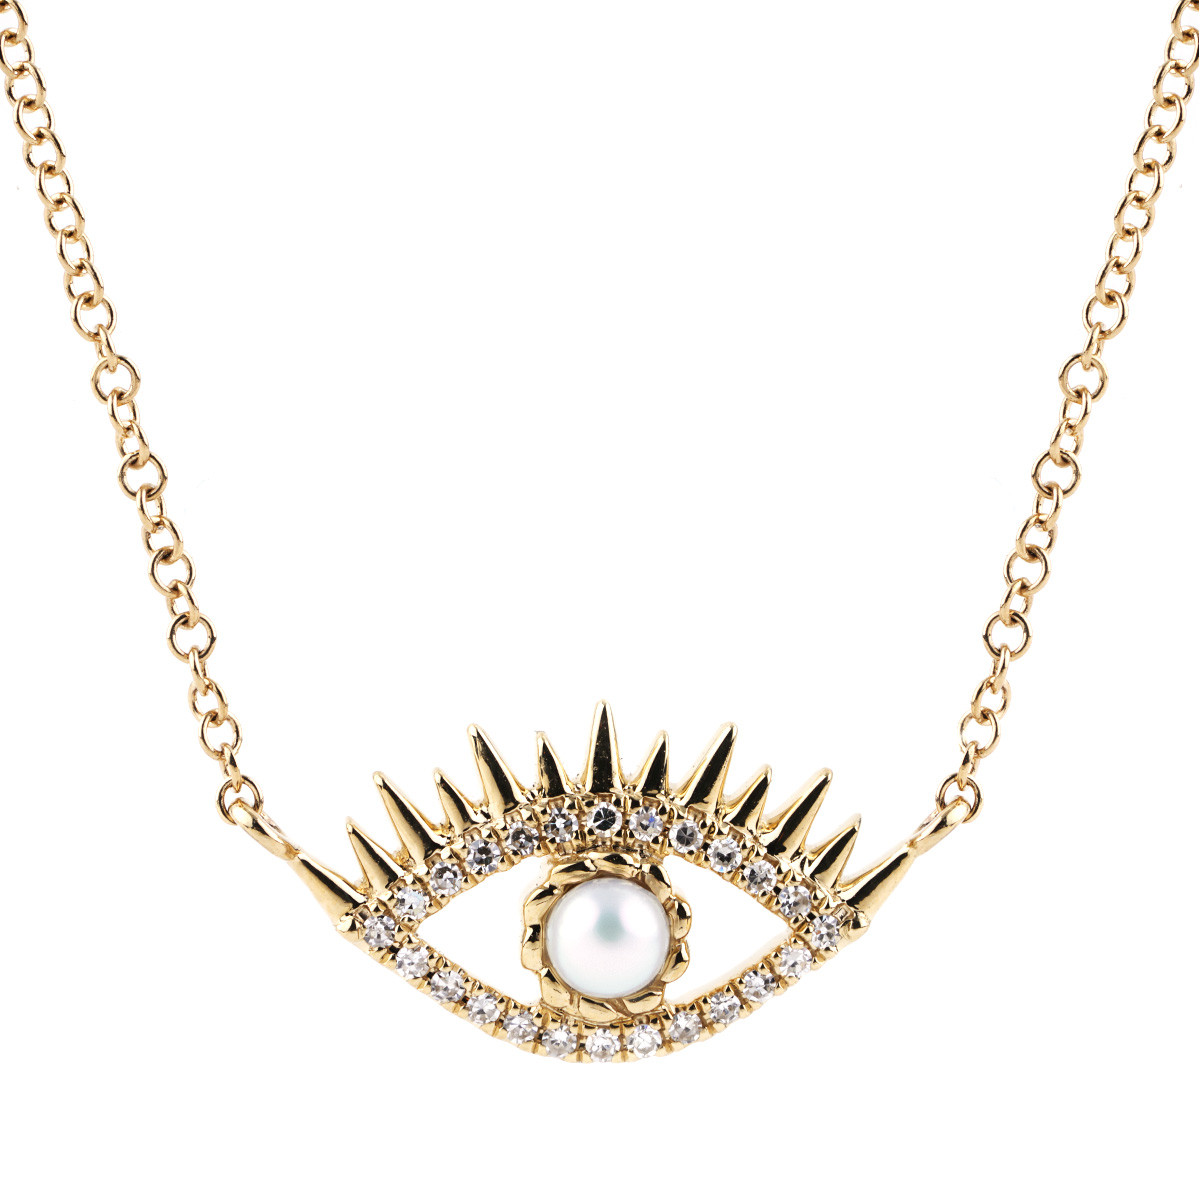 TJS Gold Plated 3 Layered Chain Pendant Evil Eye Necklace #2 – That Jewelry  Store